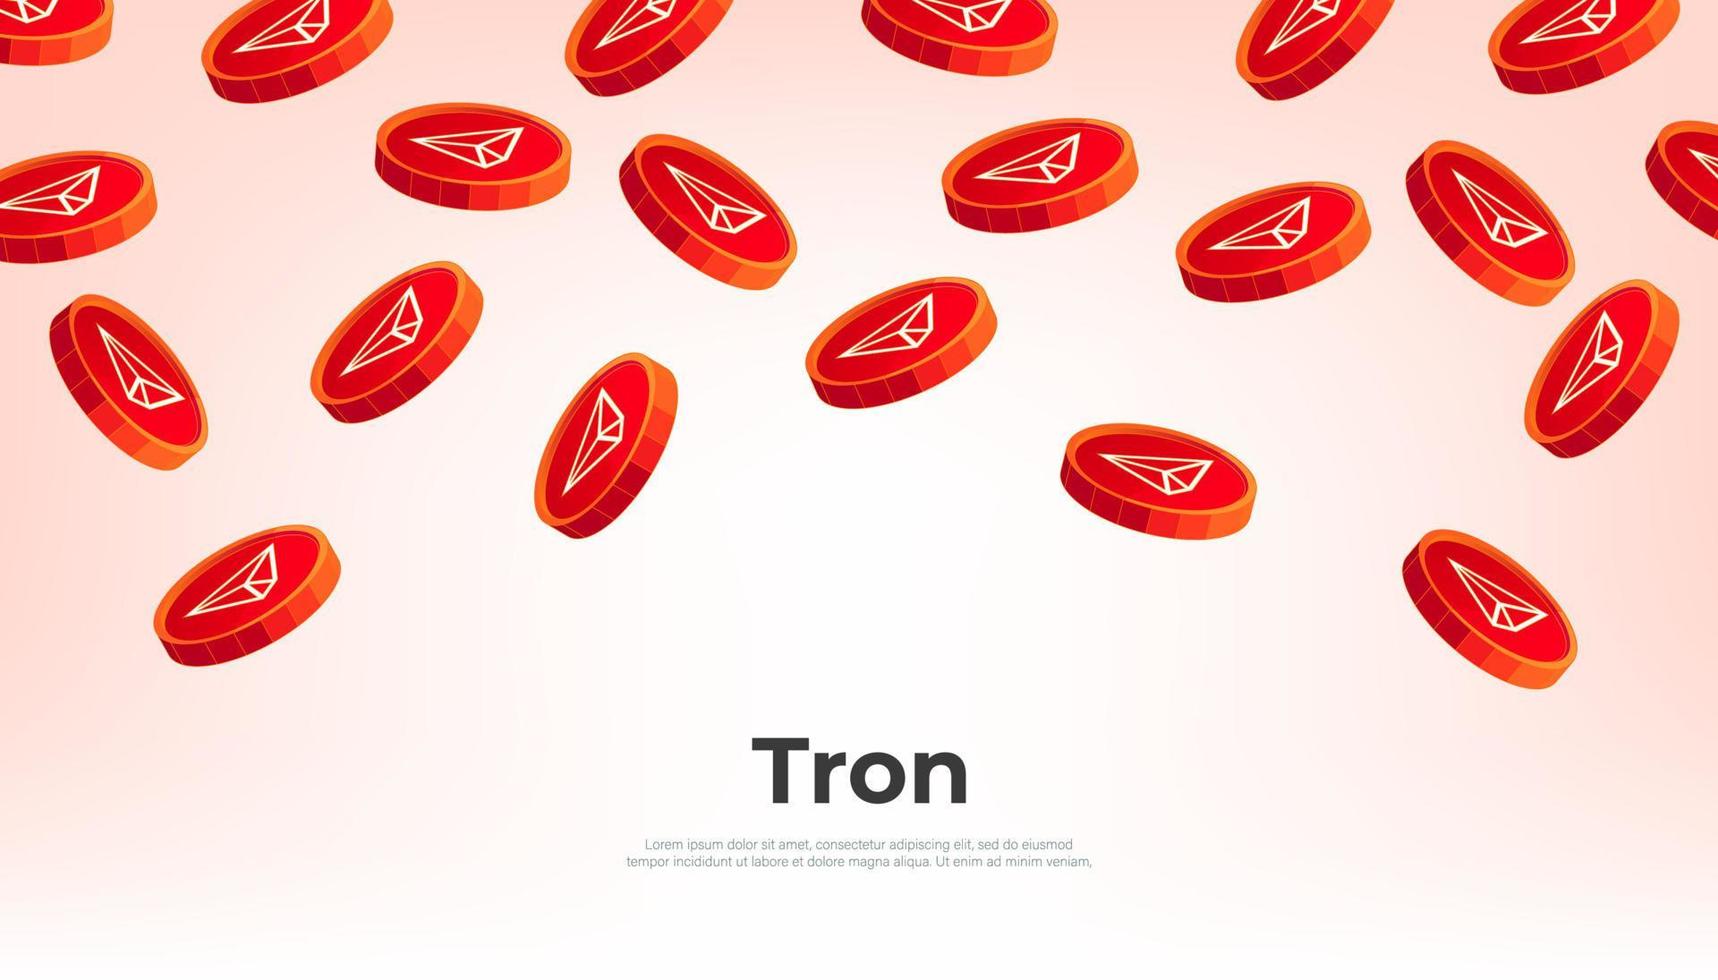 TRON coin falling from the sky. TRX cryptocurrency concept banner background. vector